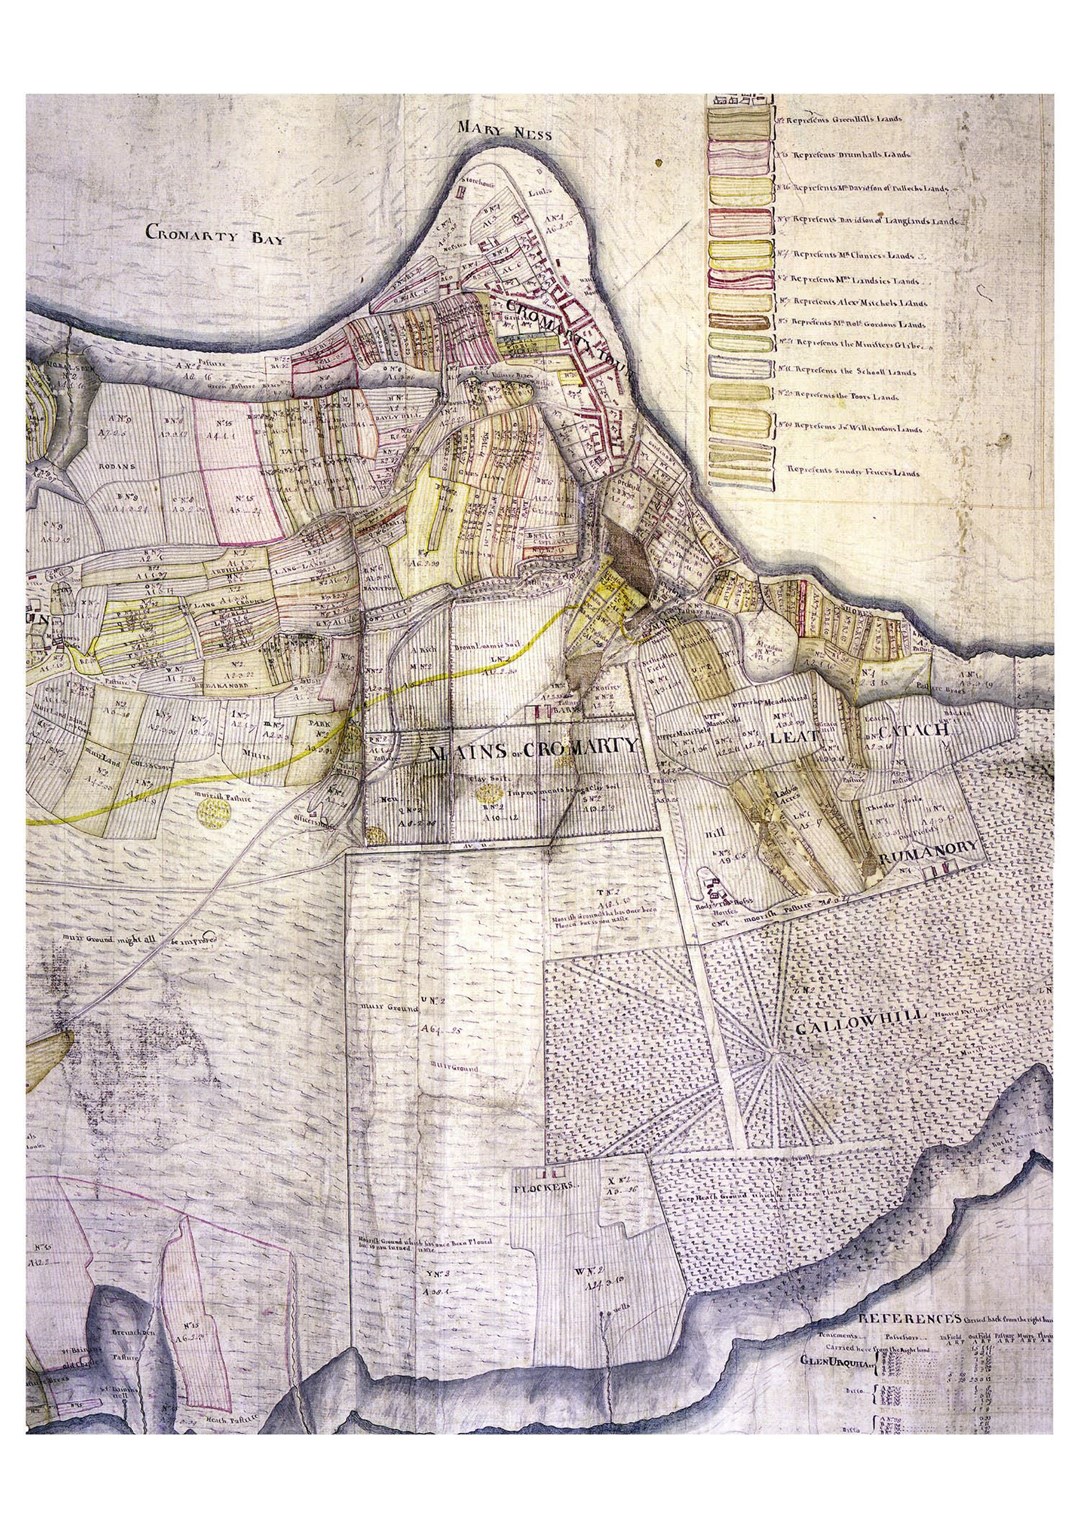 A map of the Mains of Cromarty by David Aitken, in the18th century.